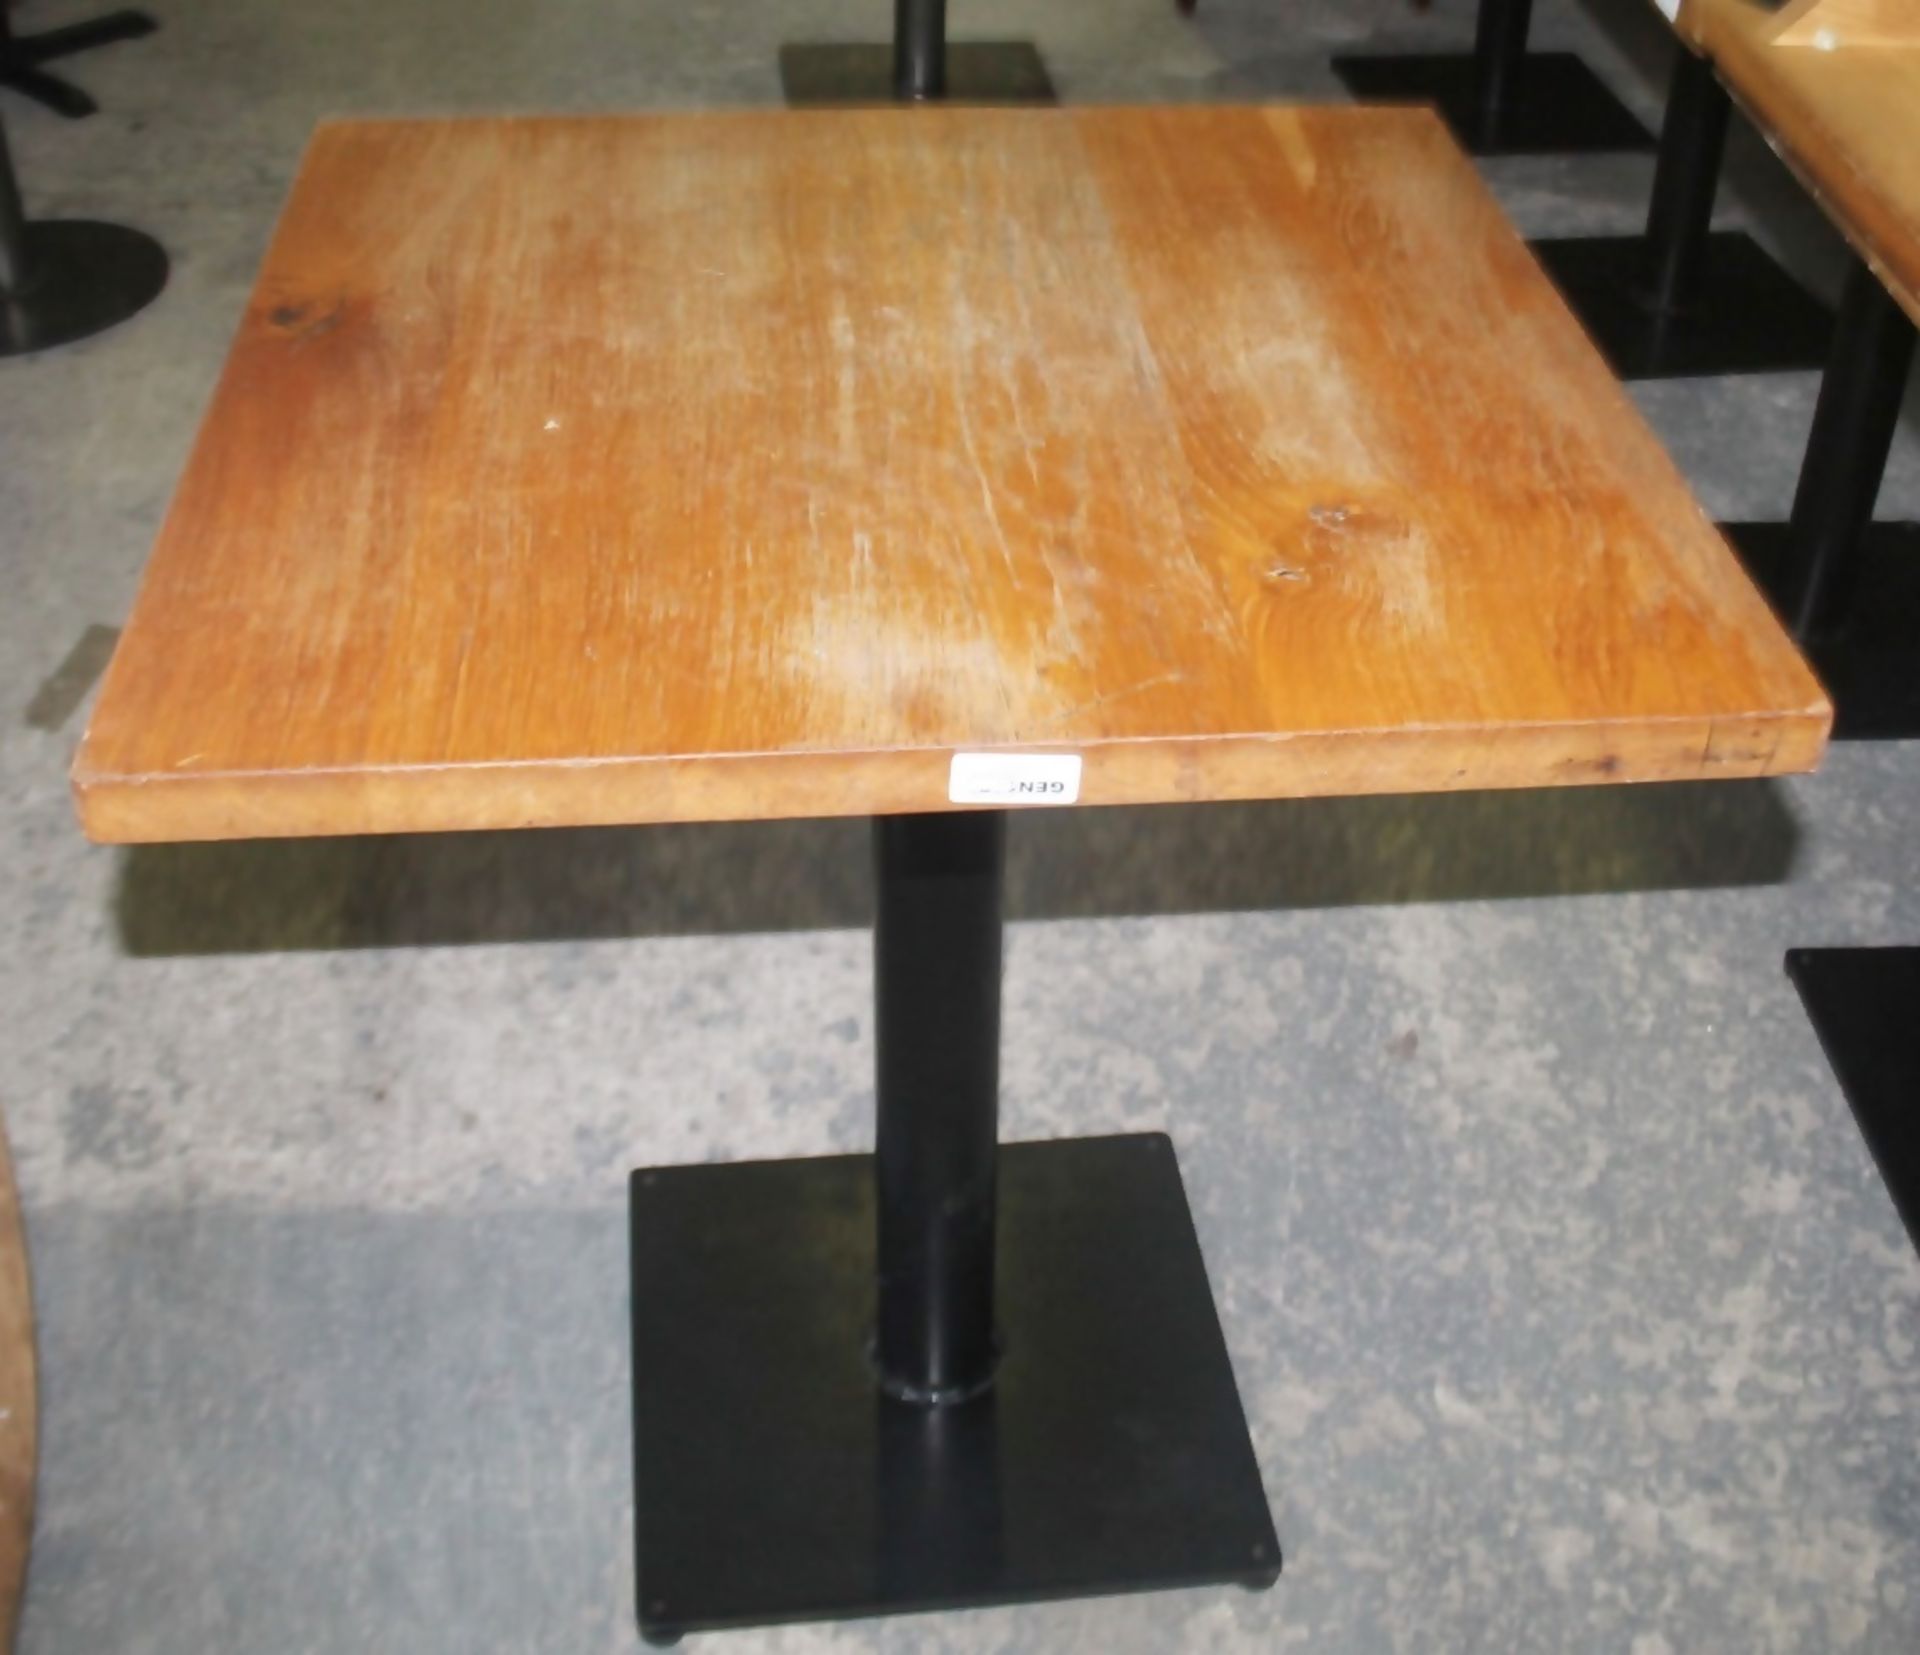 4 x Solid Oak Restaurant Dining Tables - Natural Rustic Knotty Oak Tops With Black Cast Iron Bases - - Image 2 of 7